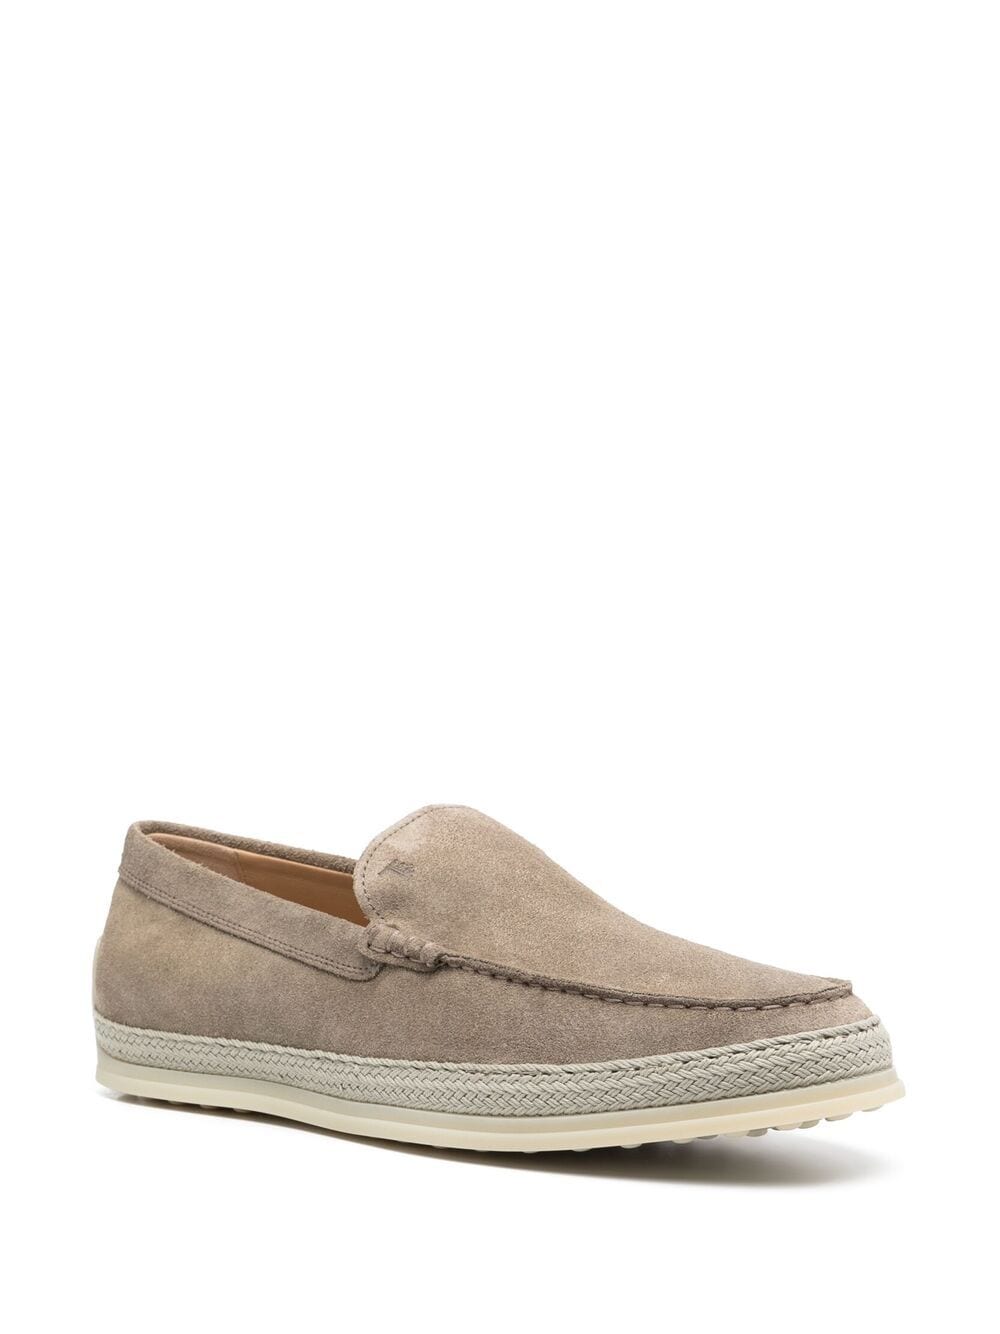 Neutral suede round-toe slip-on loafers